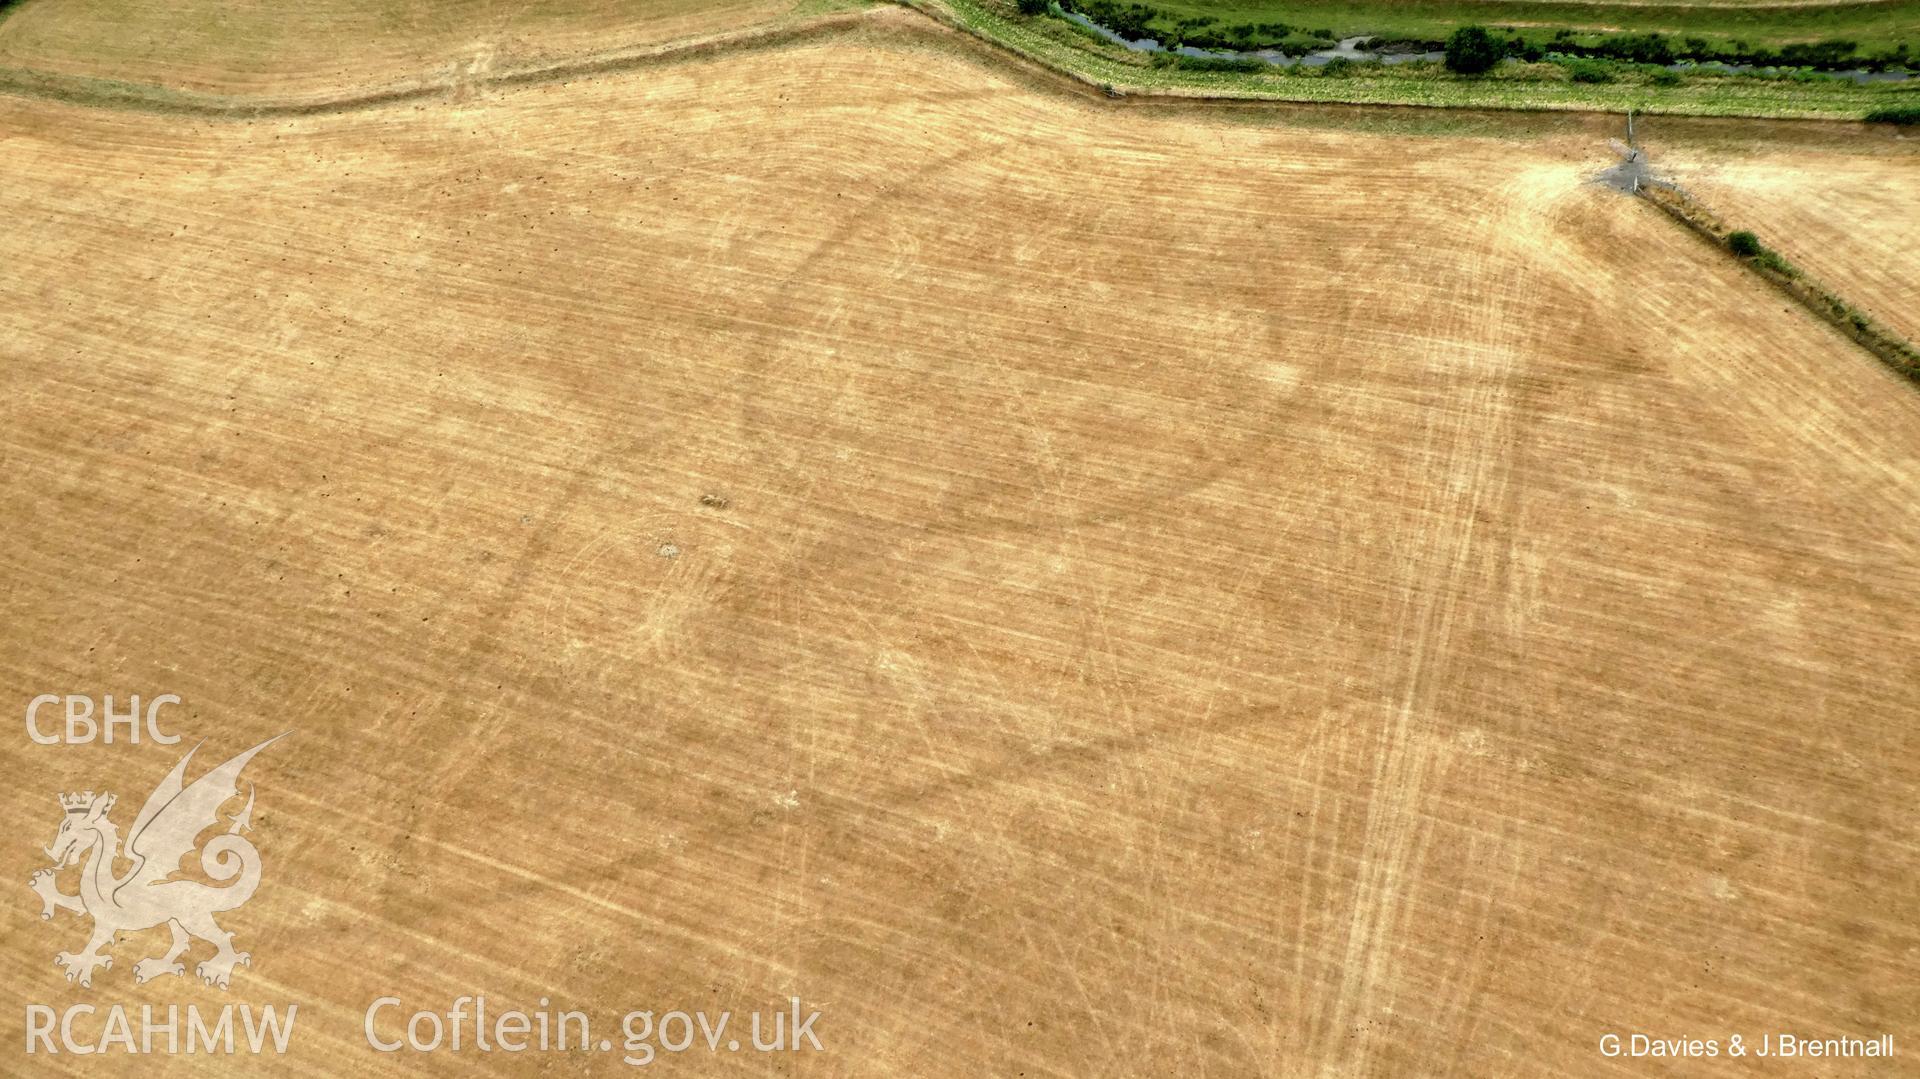 Aerial photograph of the Bryn-Crug cropmark complex, taken by Glyn Davies & Jonathan Brentnall under drought conditions, 15/07/2018. This photograph has been modified to enhance the visibility of the archaeology. Original photograph: BDC_01_01_02.